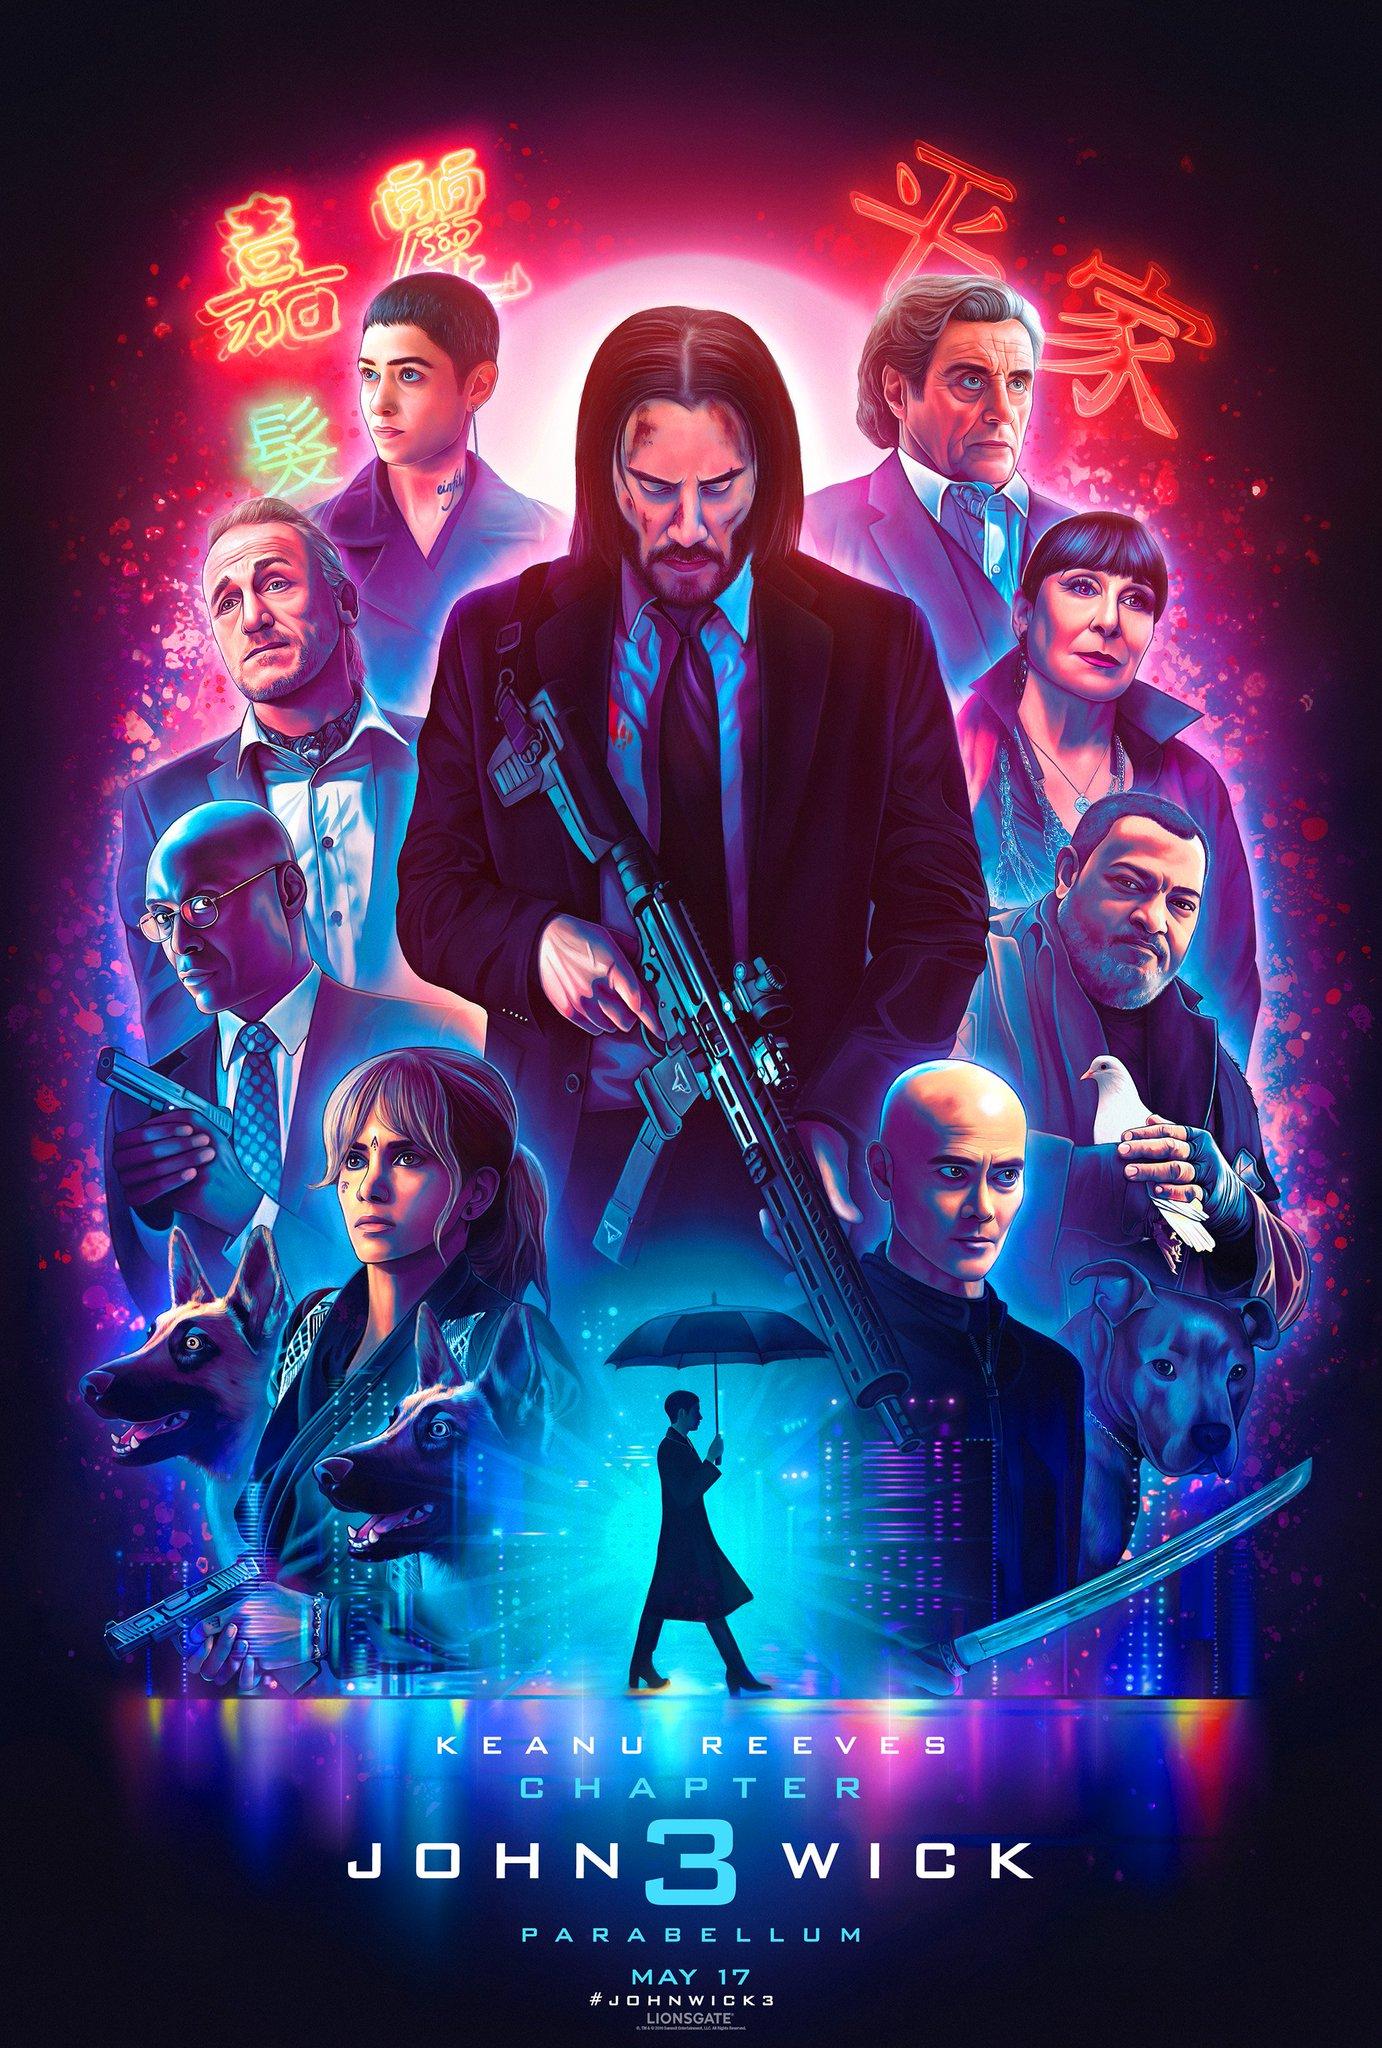 John Wick: Chapter 3 these